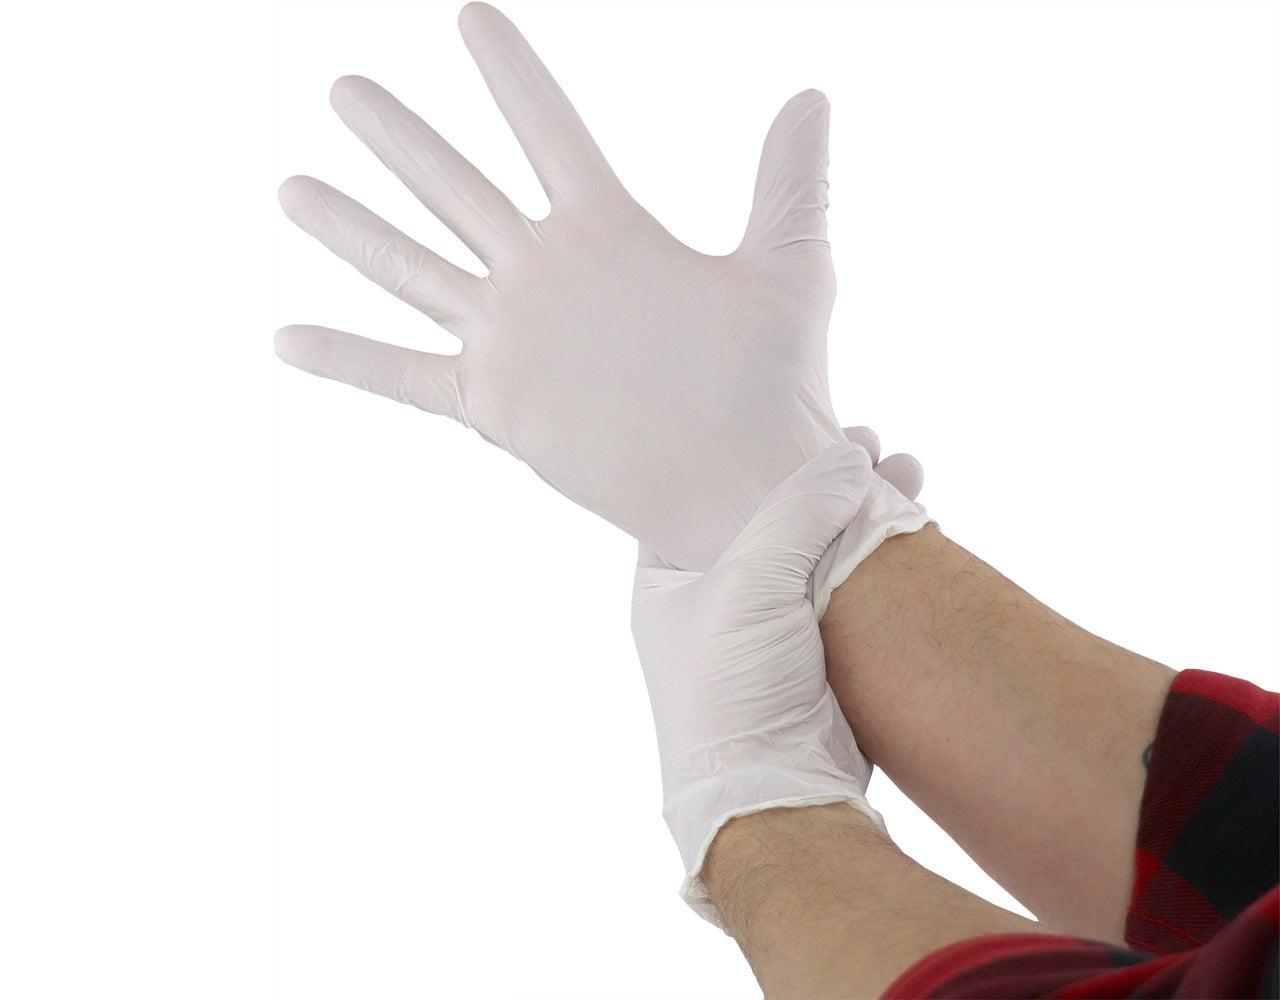 Mad Farmer White Nitrile Horticulture Gloves - Size L (100 Box)